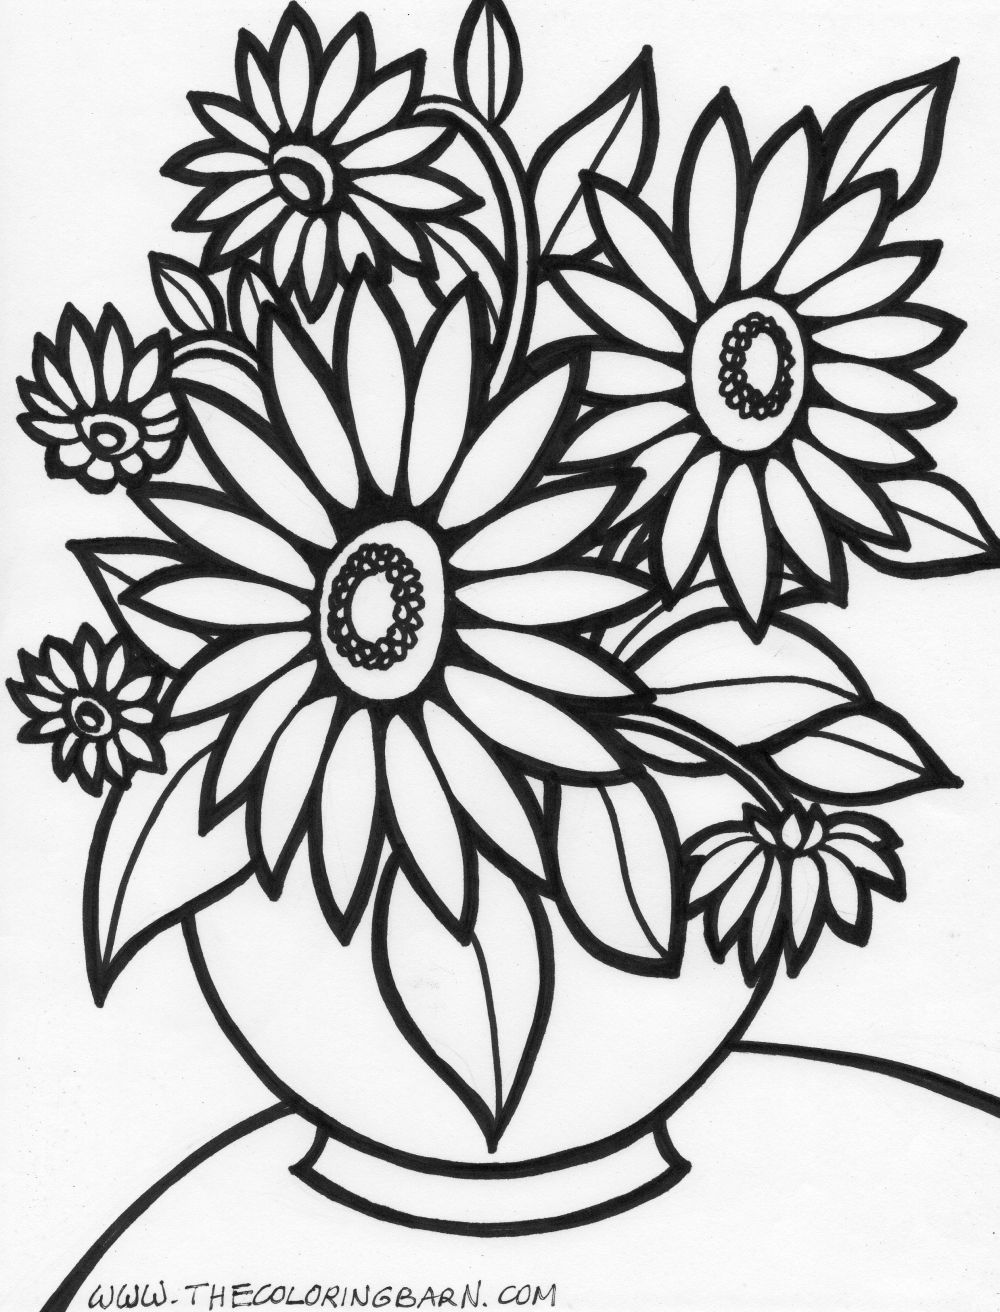  Flowers coloring pages | color printing | Flower | Coloring pages free | #44